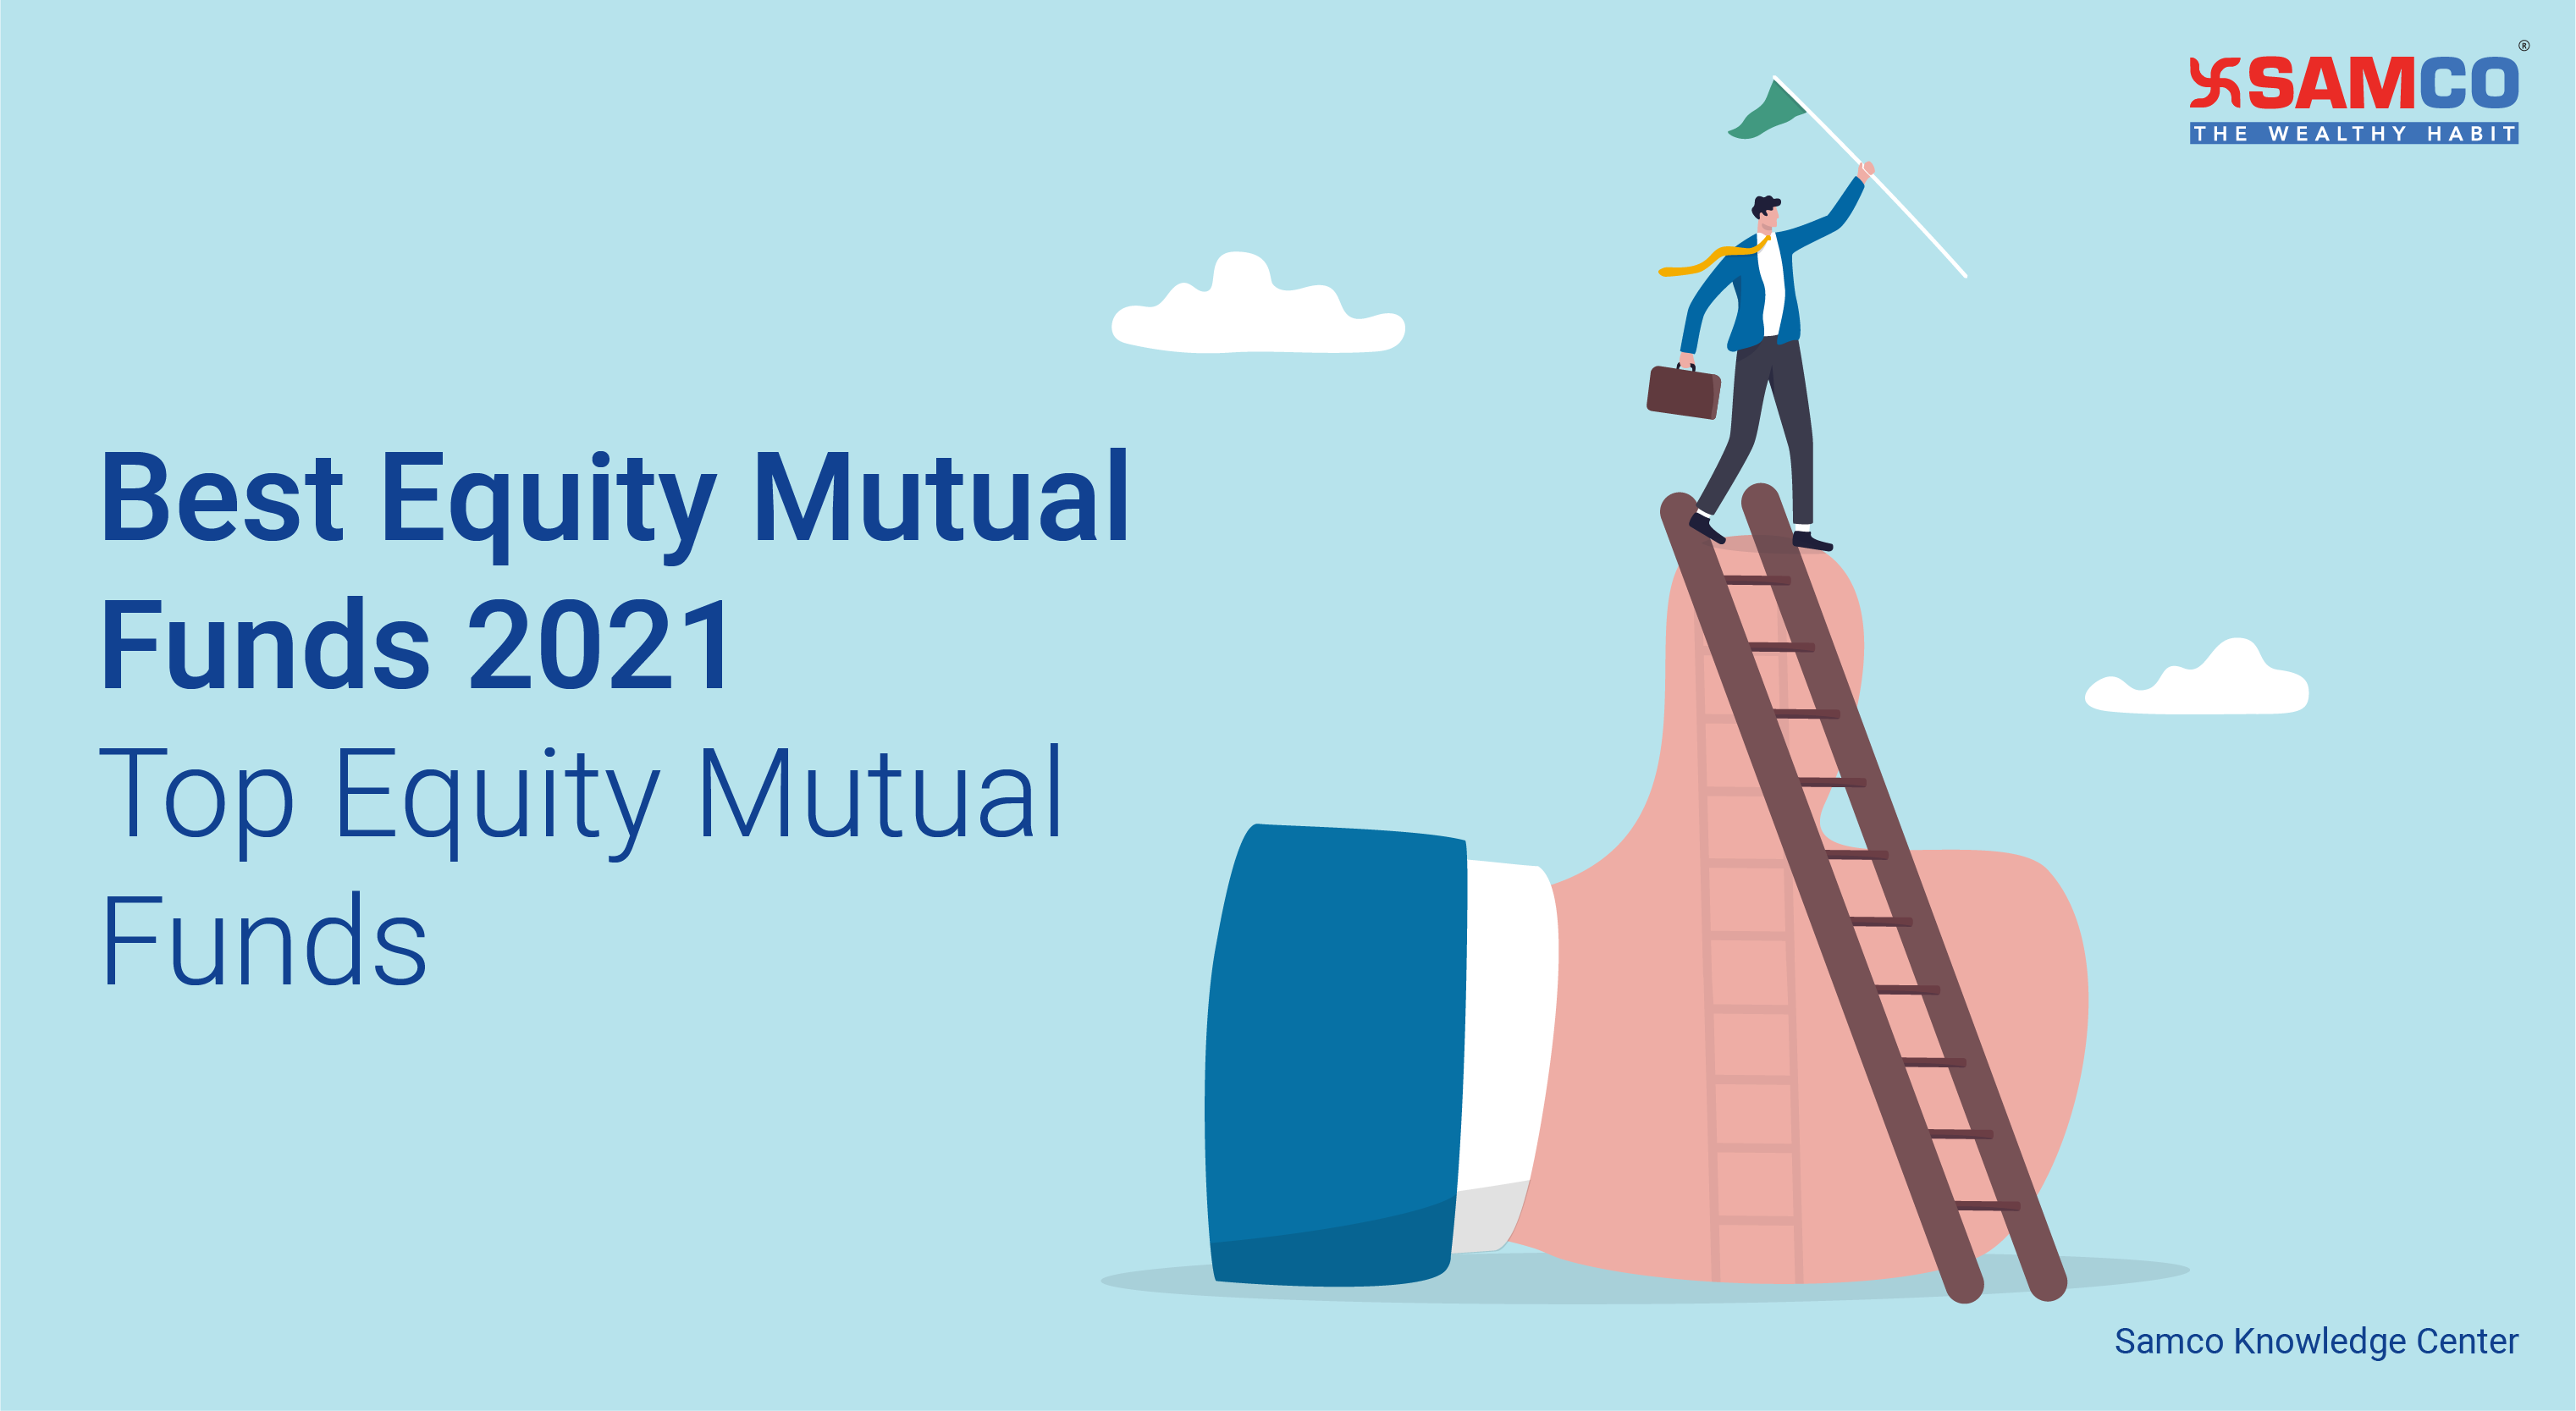 Best Equity Mutual Funds 2021 – Top Equity Mutual Funds